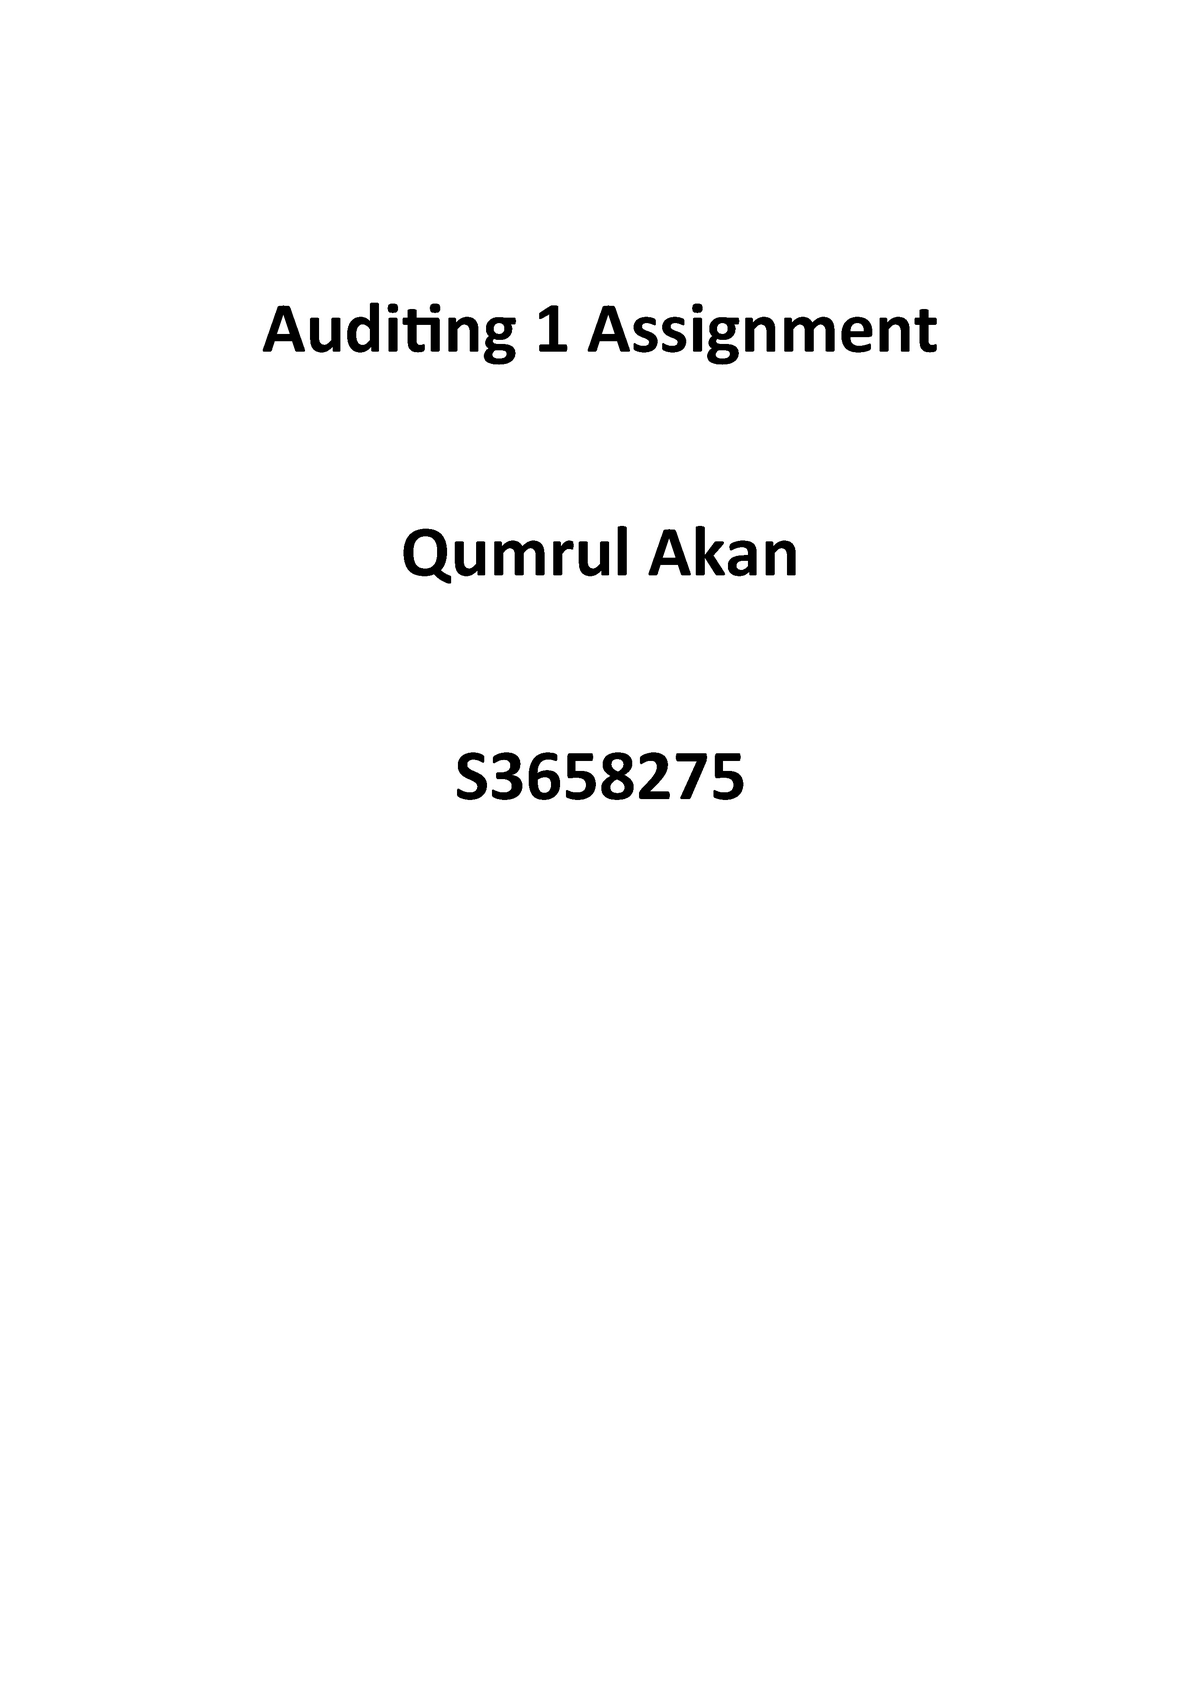 audit assignment is